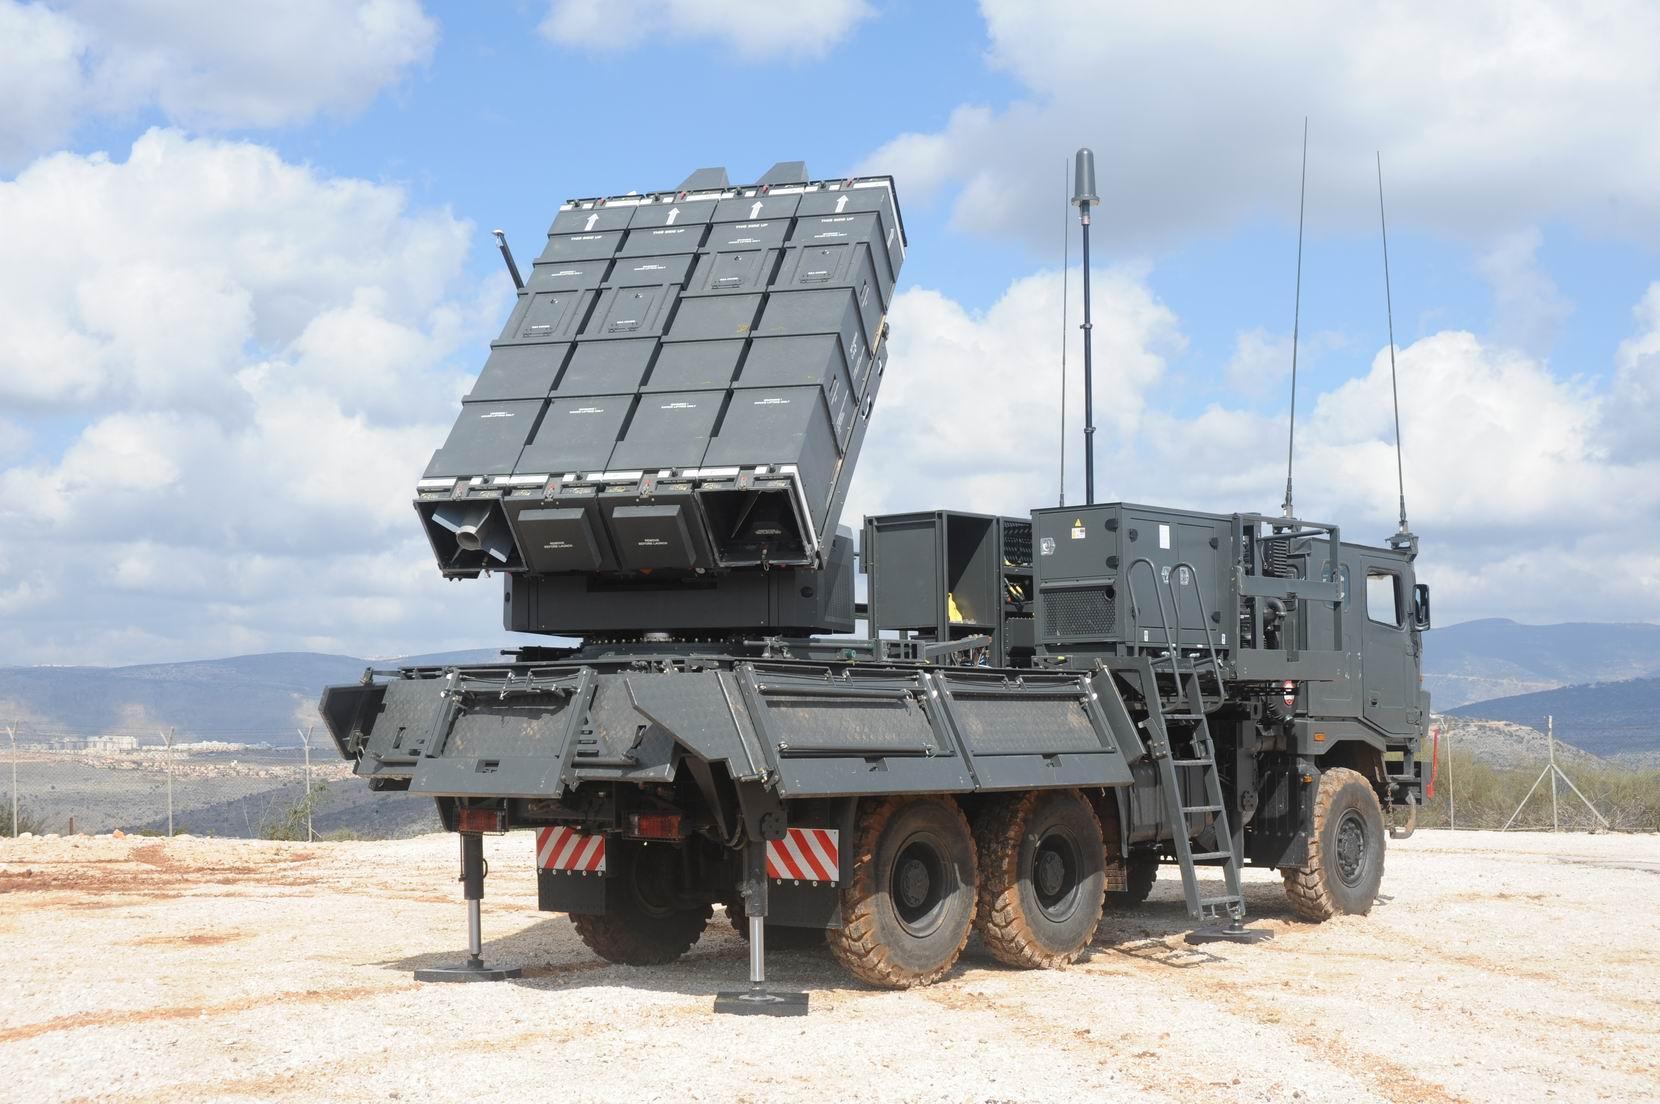 Israeli defence firm Rafael Advanced Defence Systems is putting on a strong display at the ongoing airshow, showcasing its multi-domain capabilities